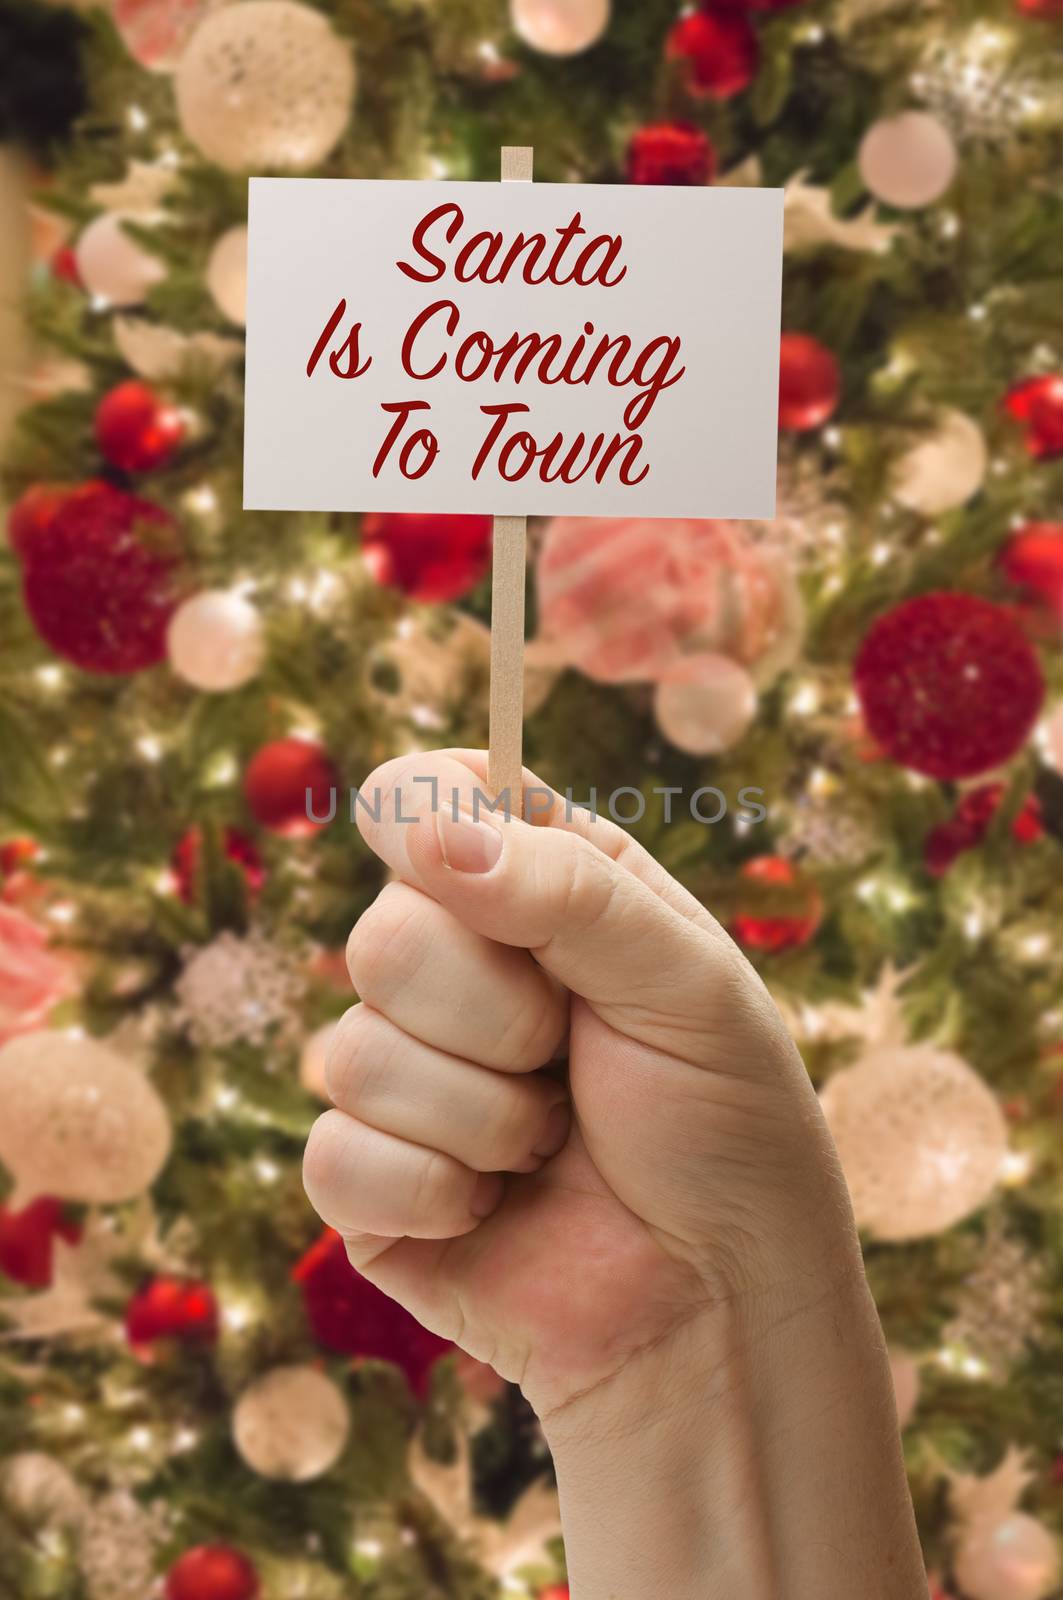 Hand Holding Santa Is Coming To Town Card In Front of Decorated Christmas Tree.